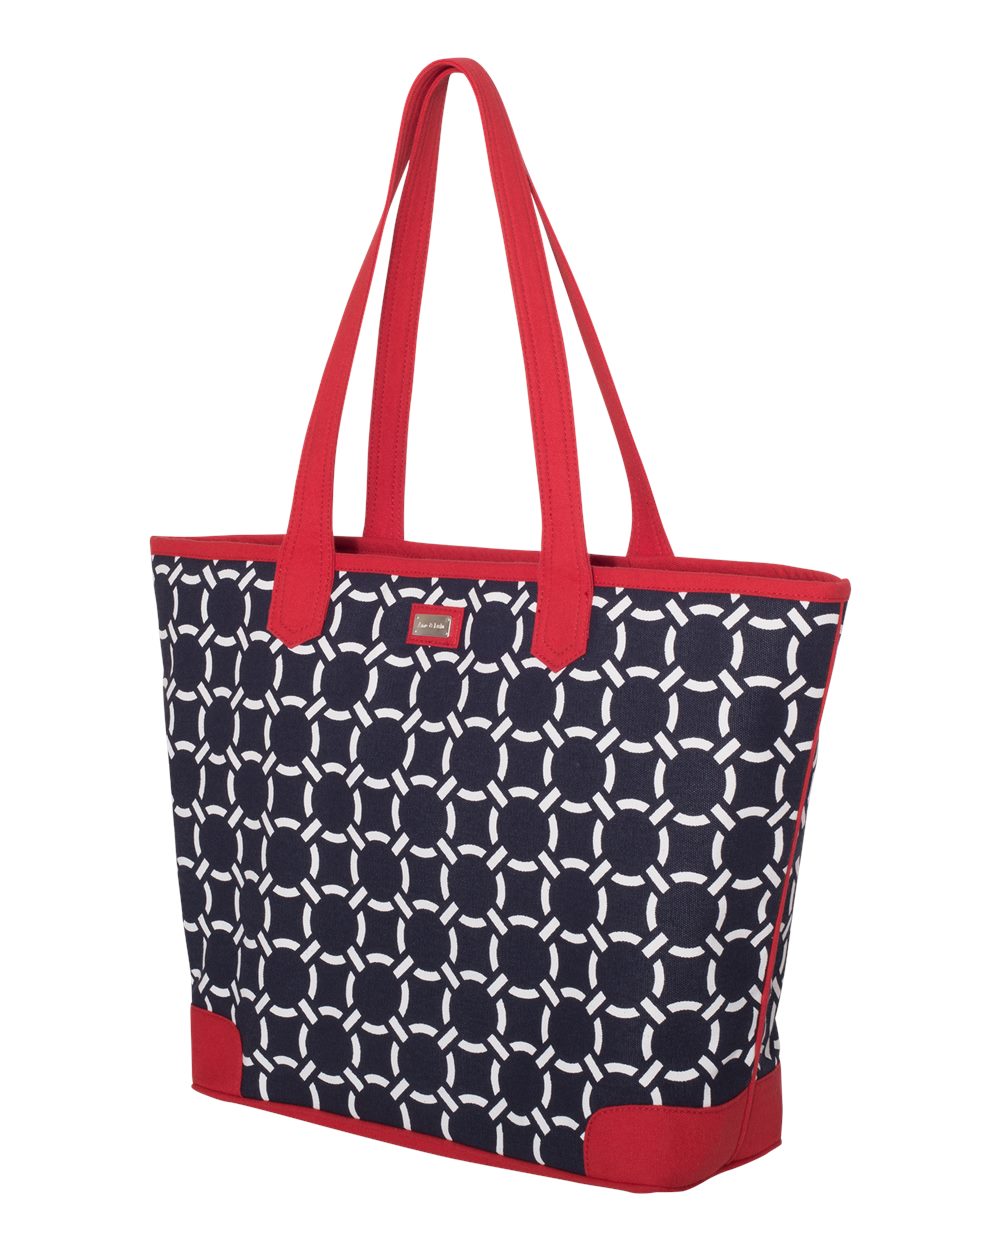 Ame & Lulu DAY100 - 25.5L Day Tote $44.88